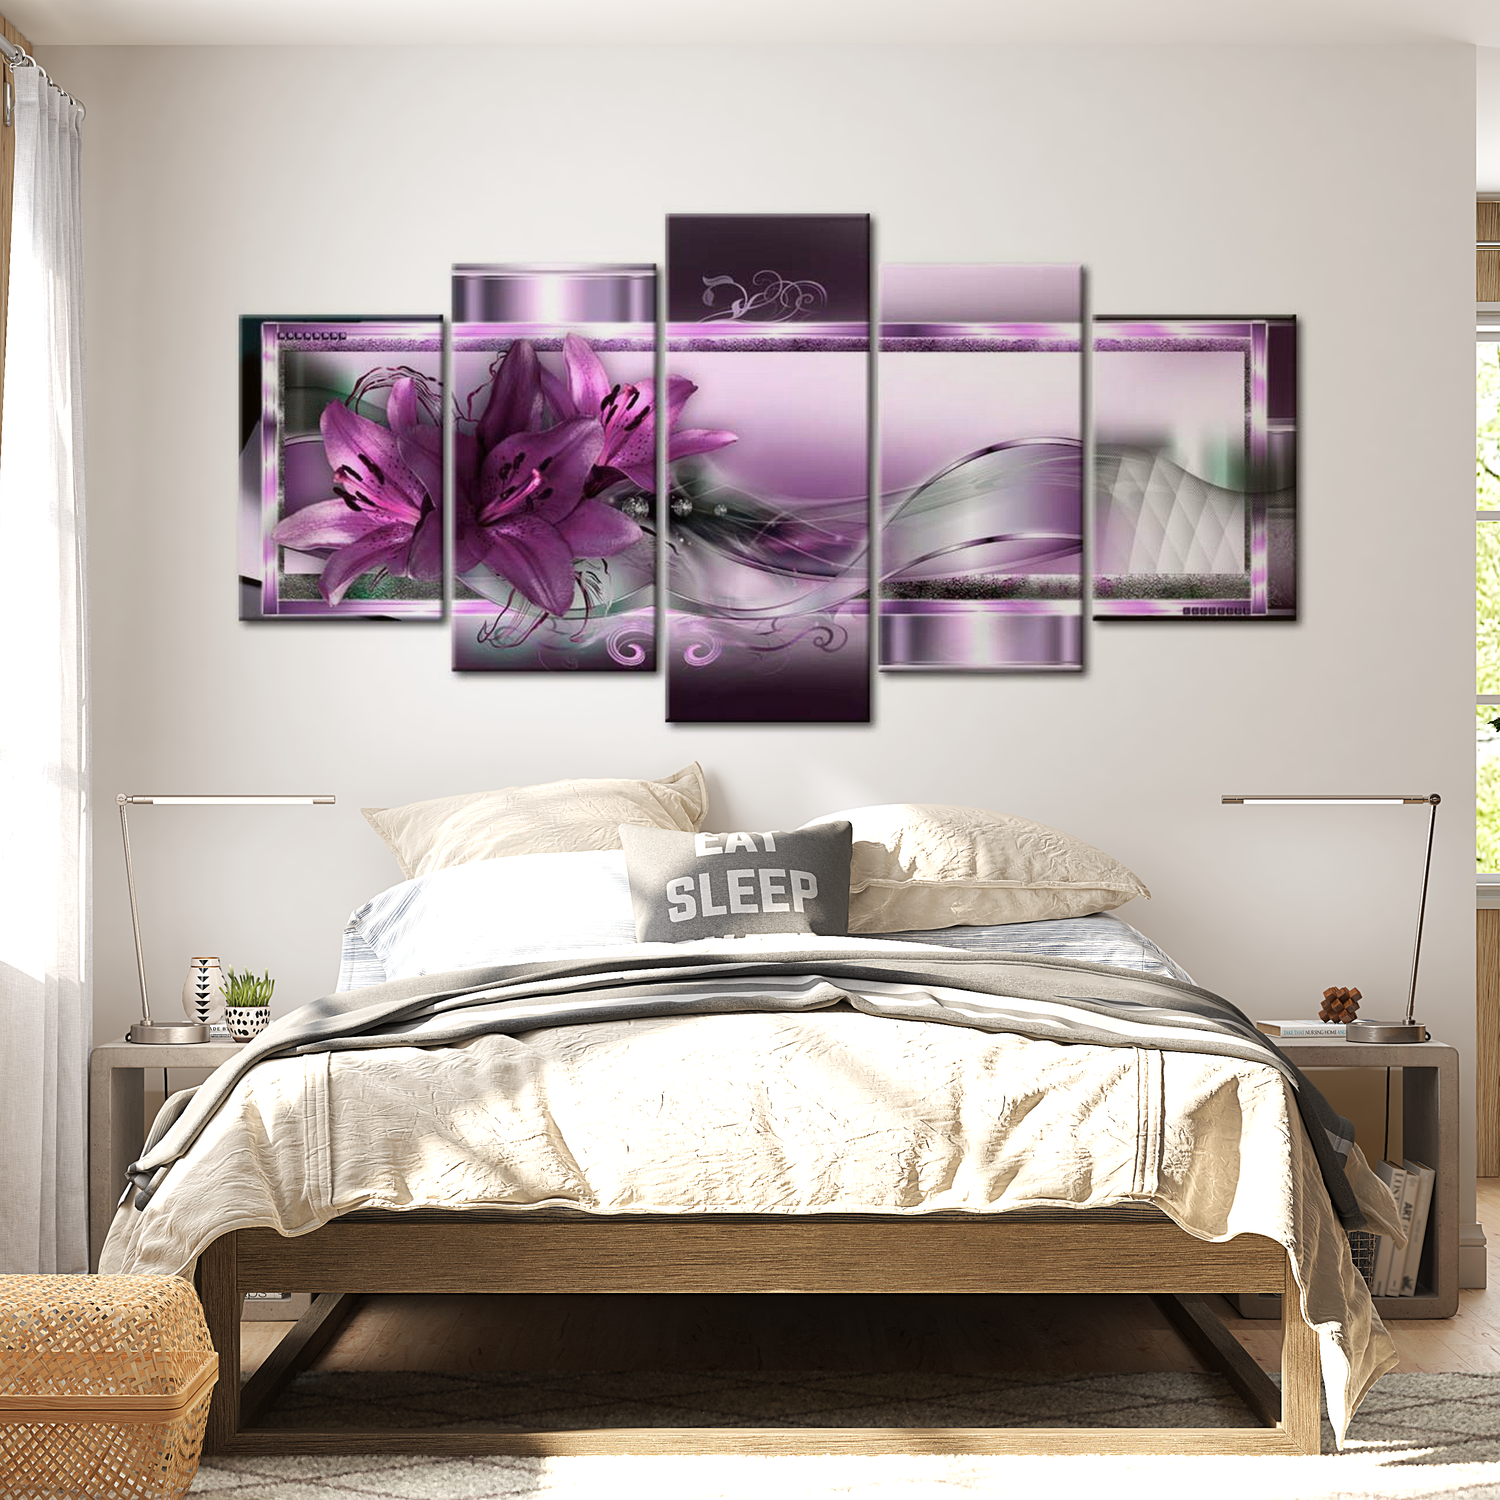 Stretched Canvas Glamour Art - Purple Lilies 40"Wx20"H